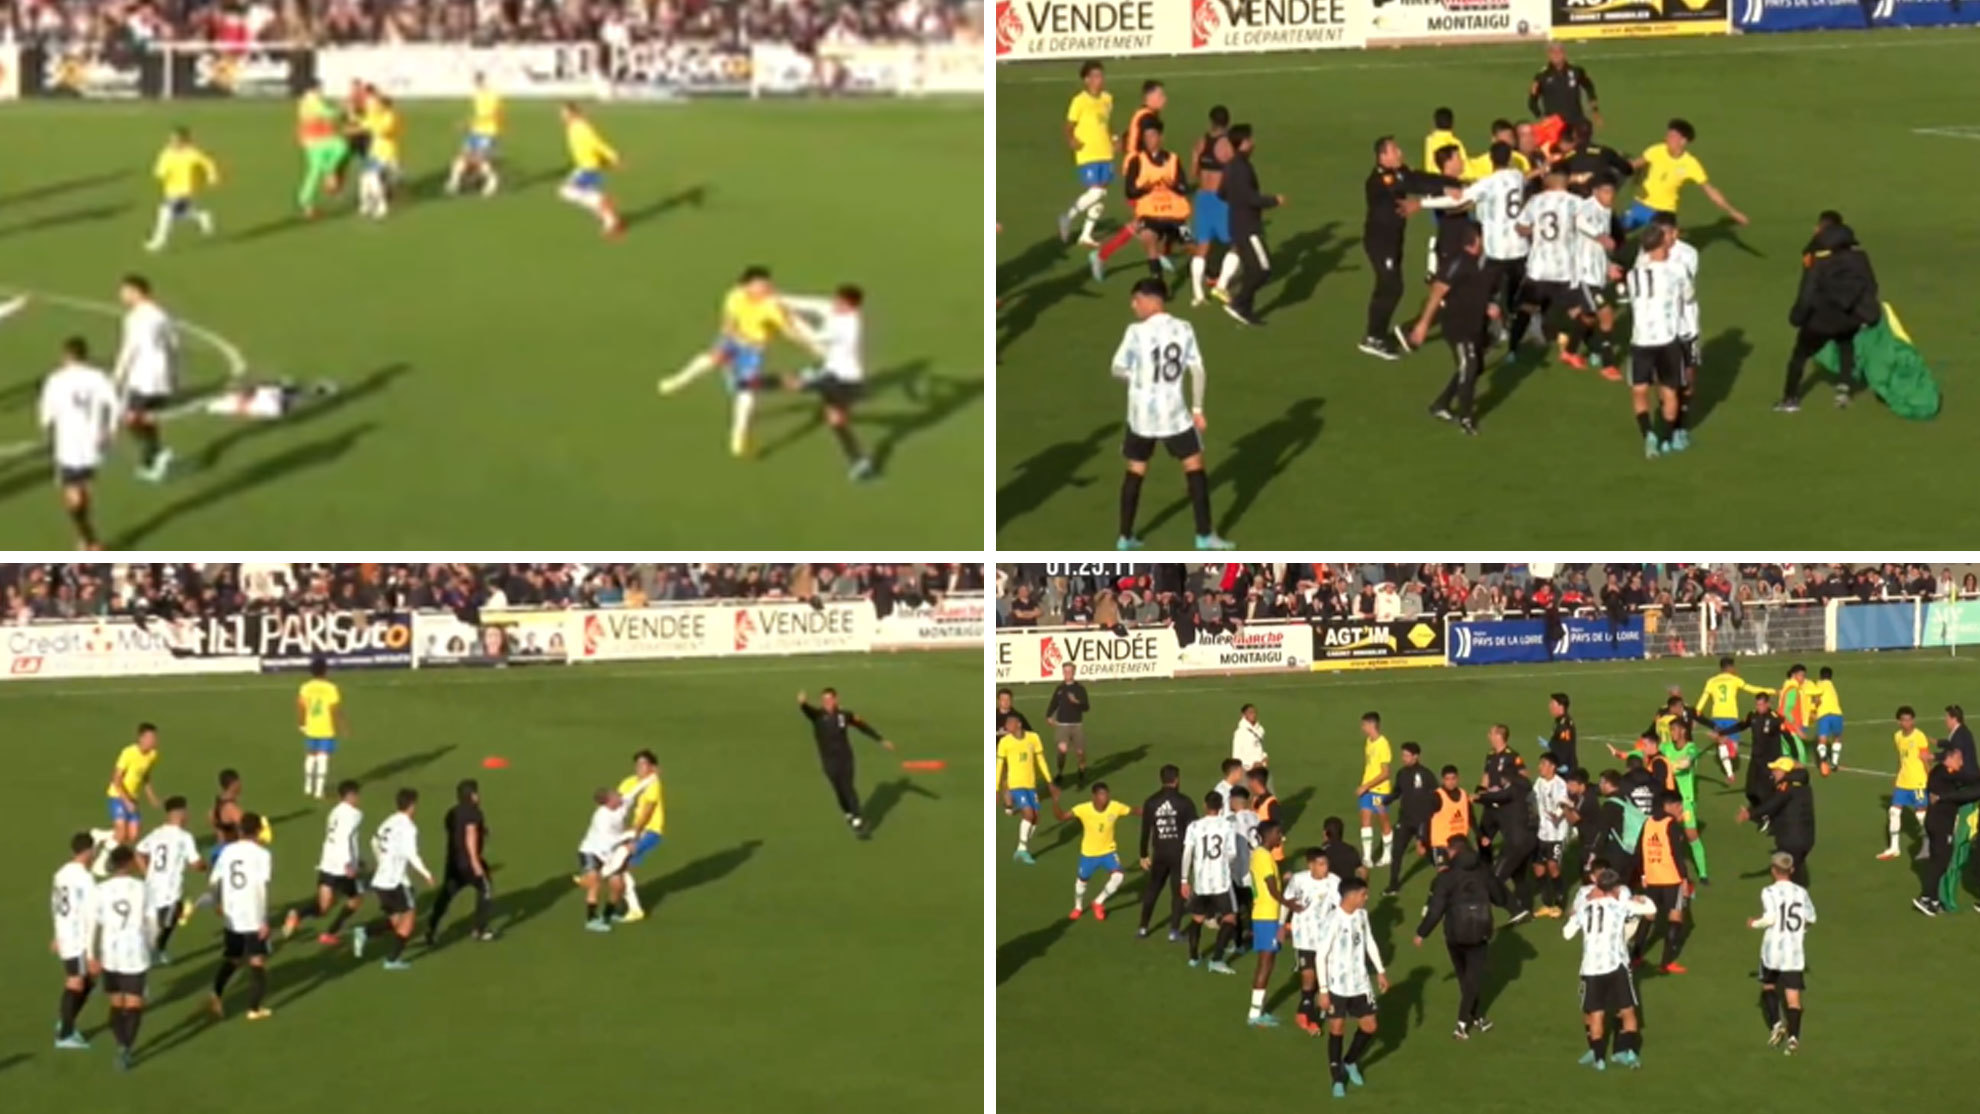 It hurts to see this in an U16 tournament: Huge brawl between Argentina and Brazil